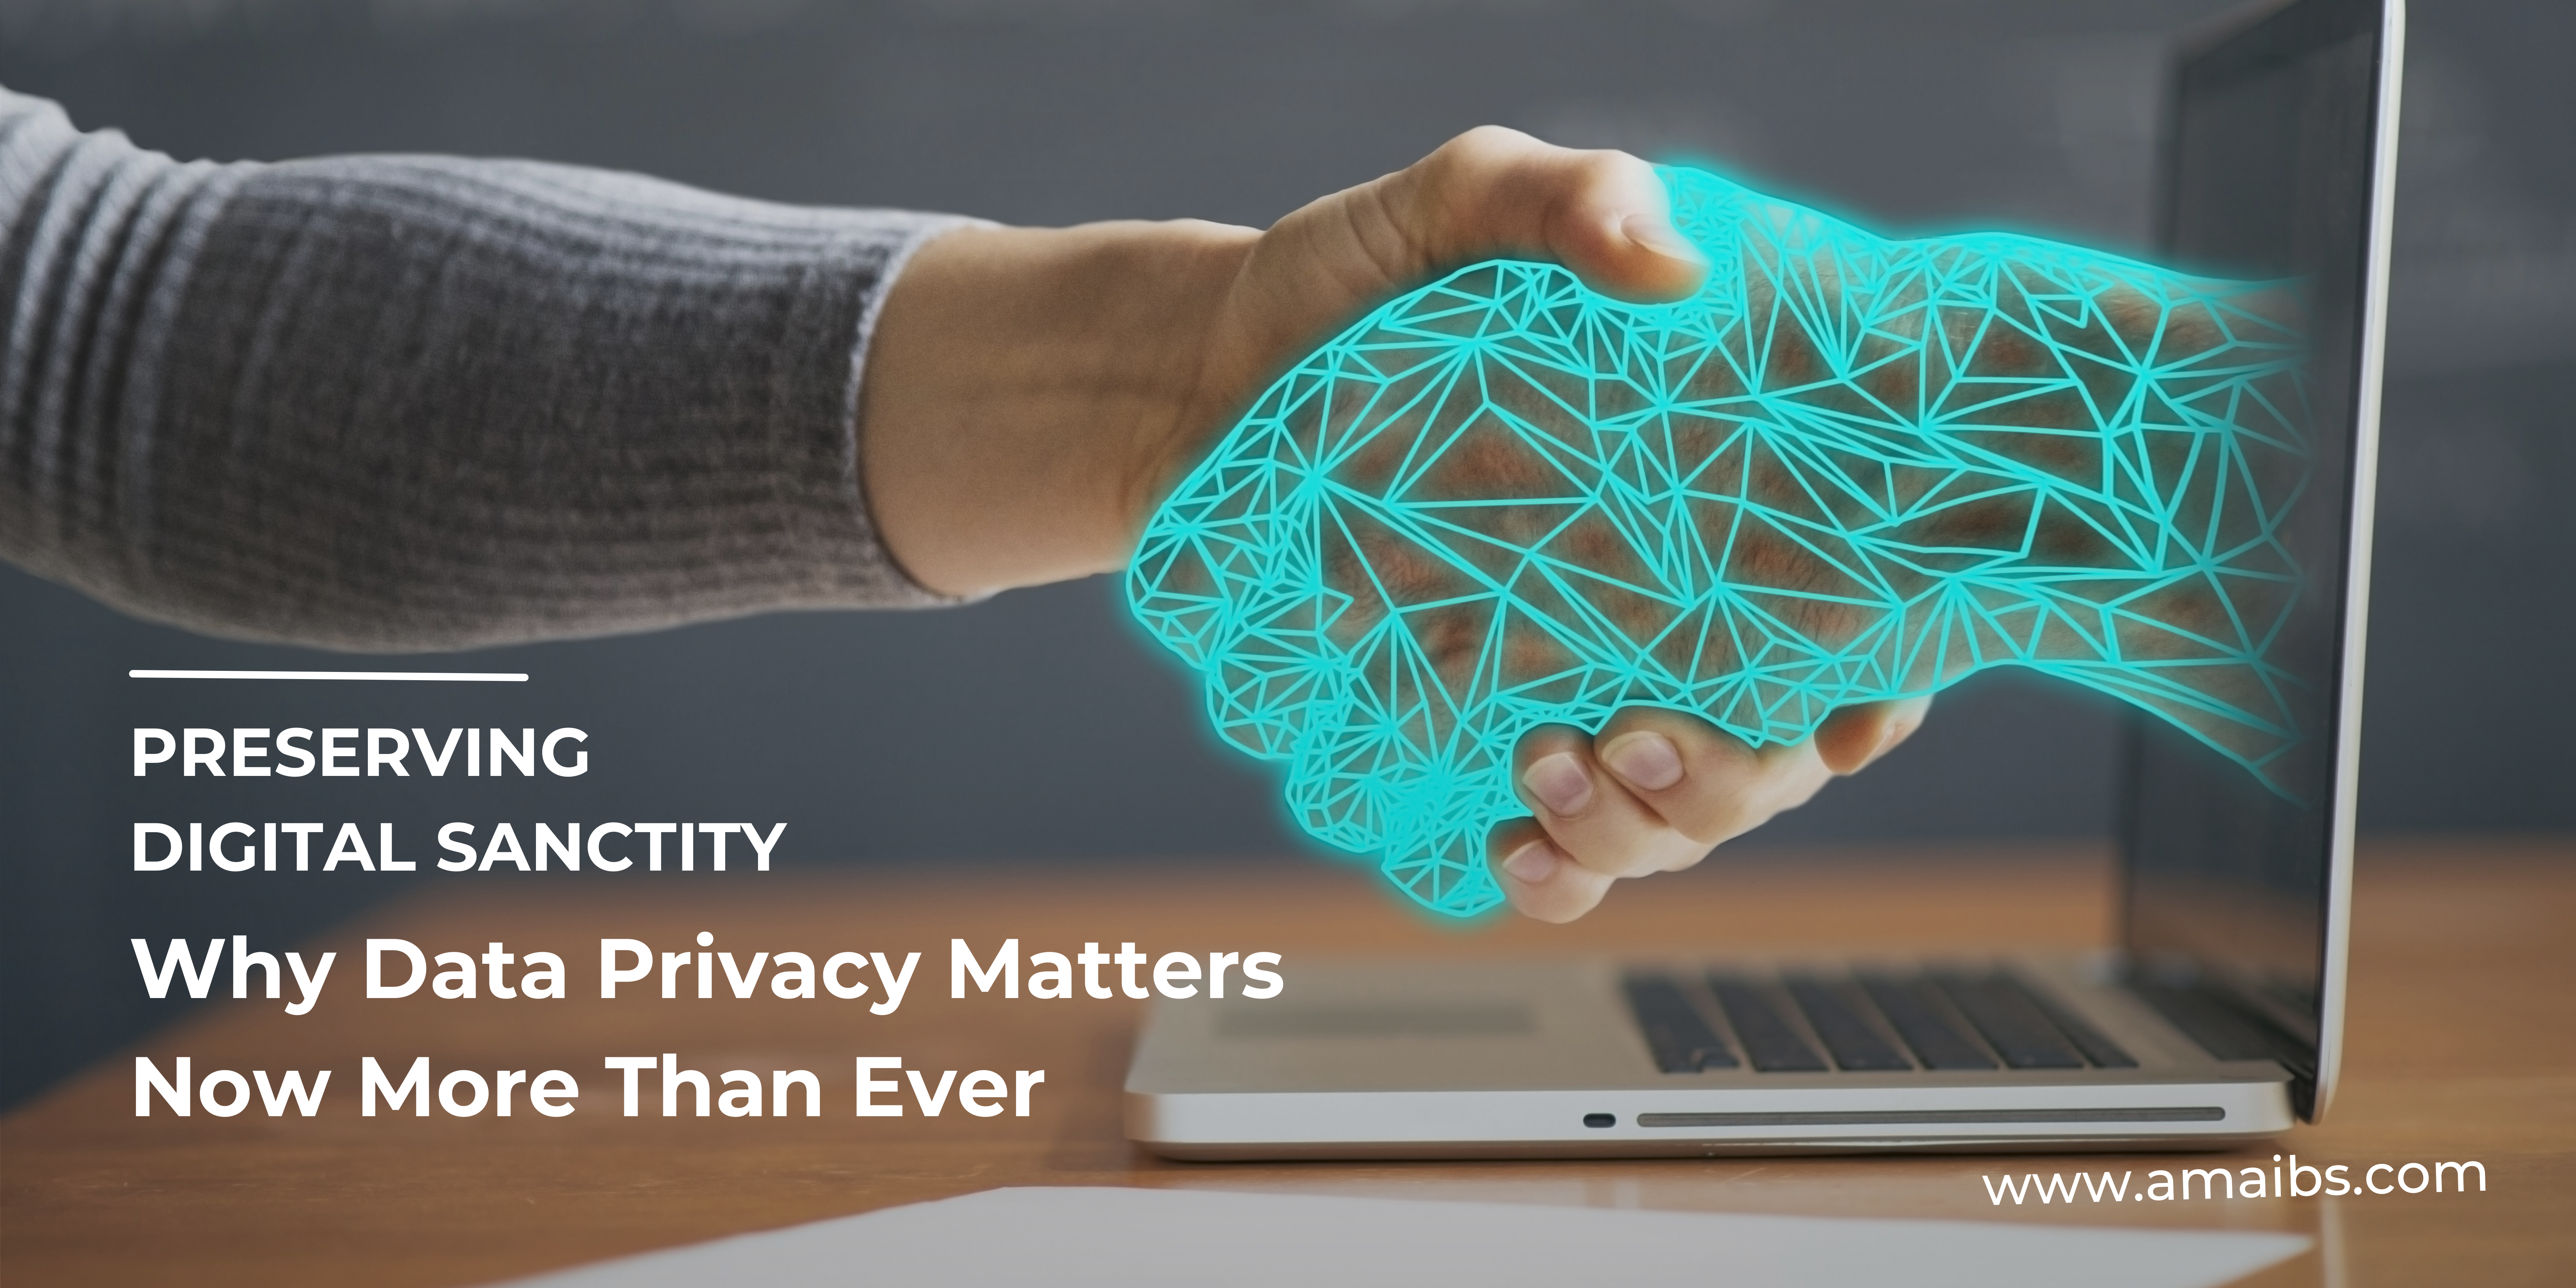 Preserving the Digital Sanctity: Why Data Privacy is More Important Than Ever